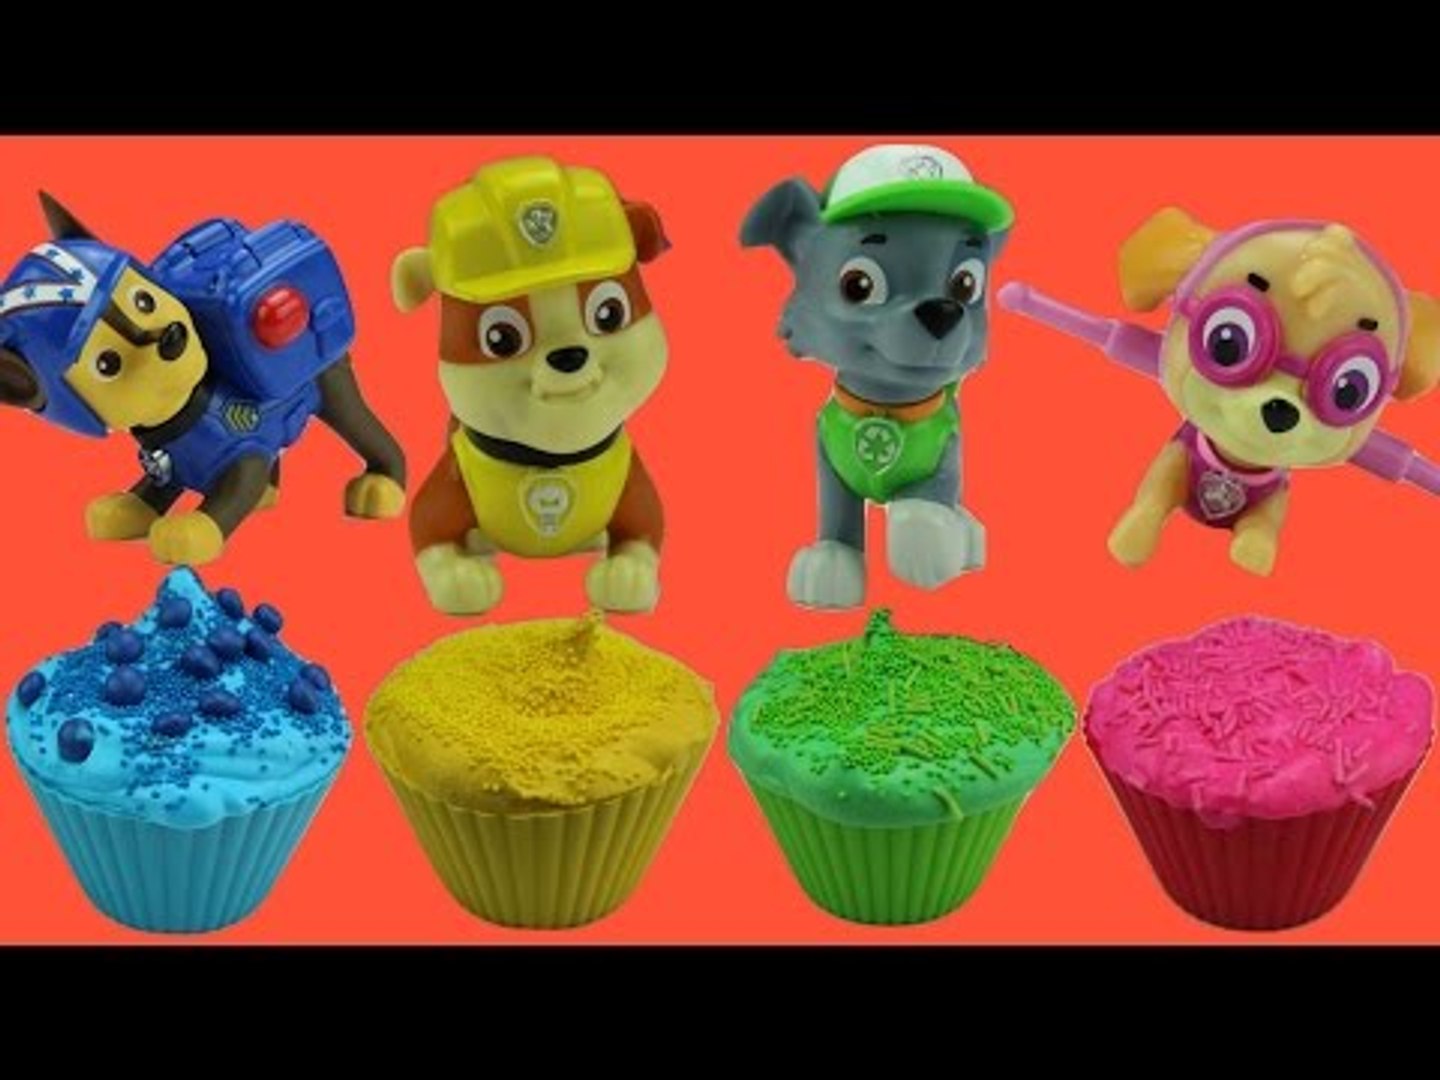 Tic Tac Toy videos - Dailymotion